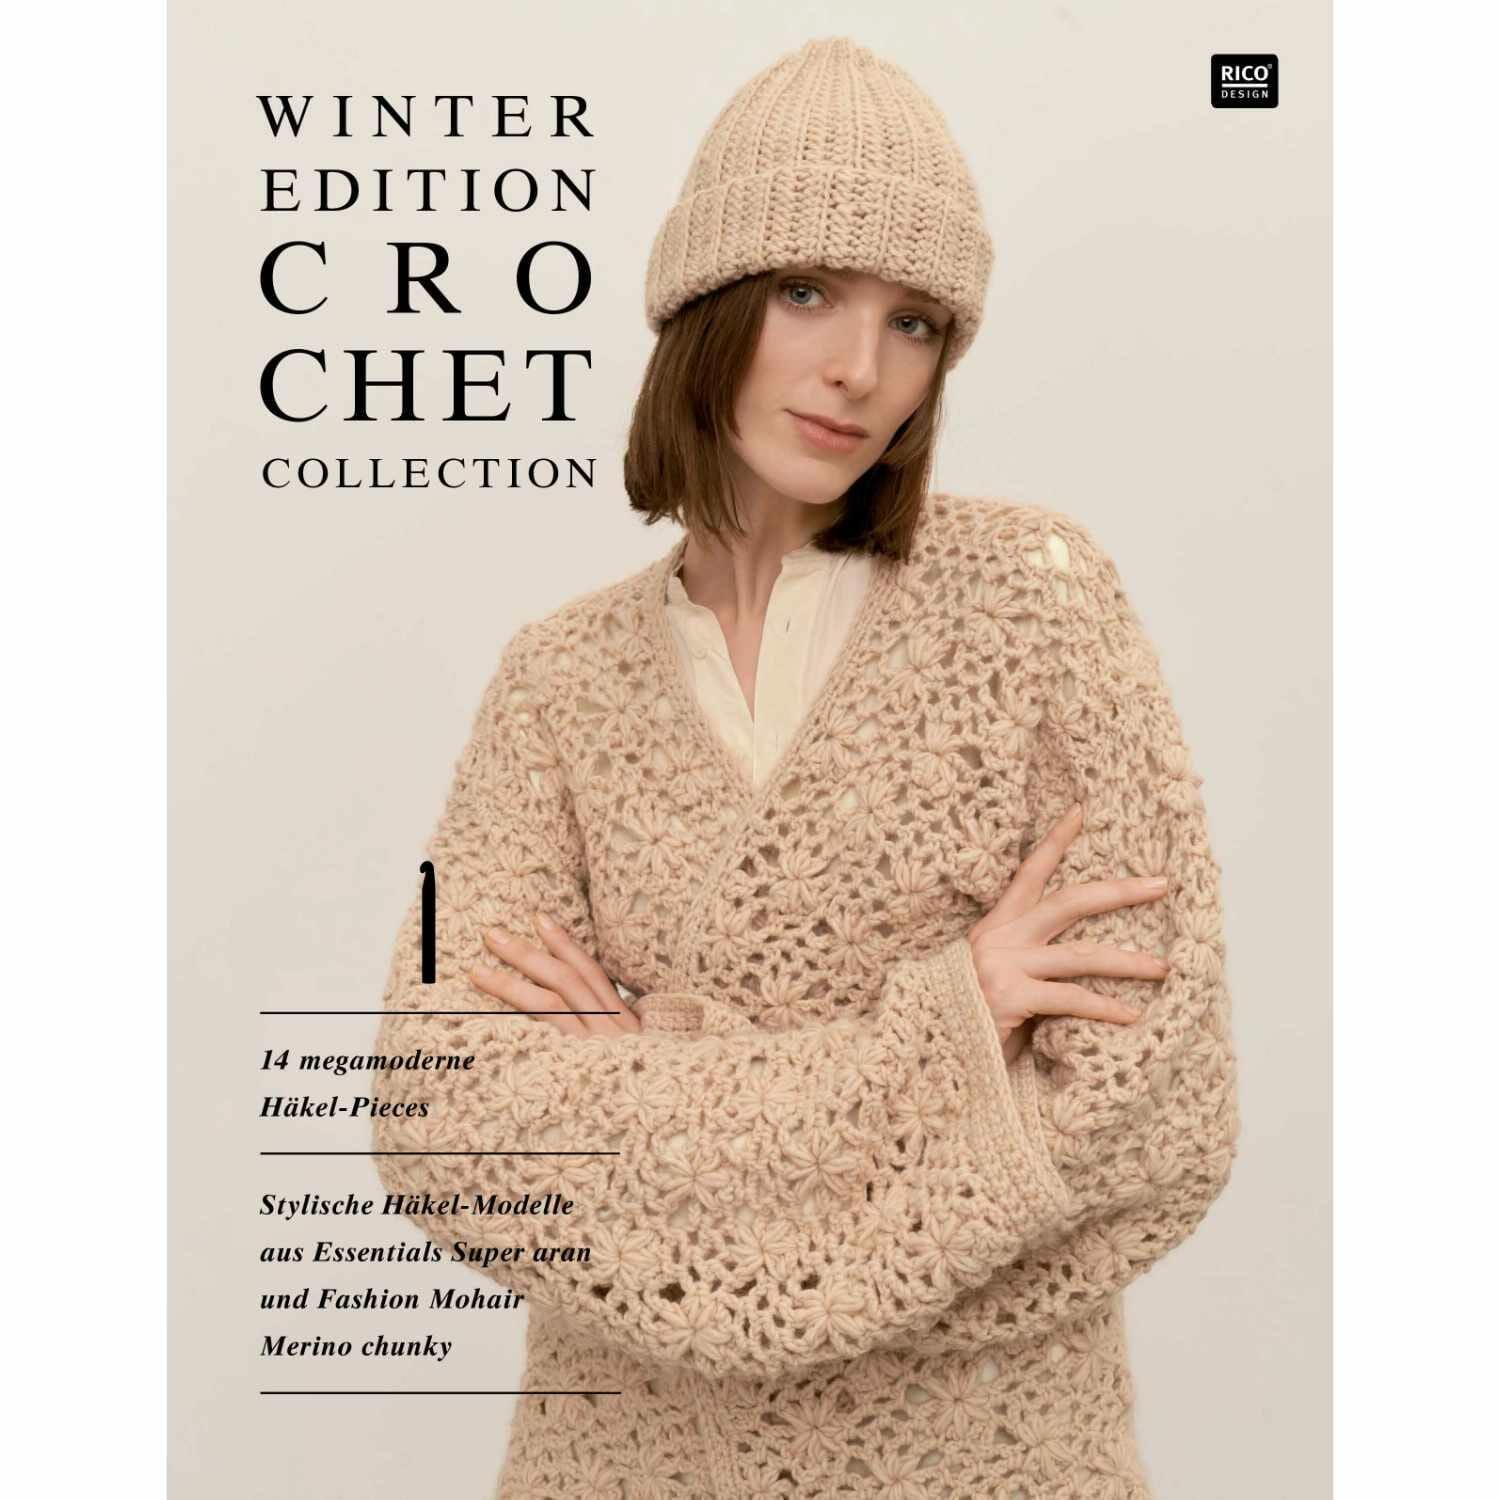 Rico Winteredition Crochet Collection